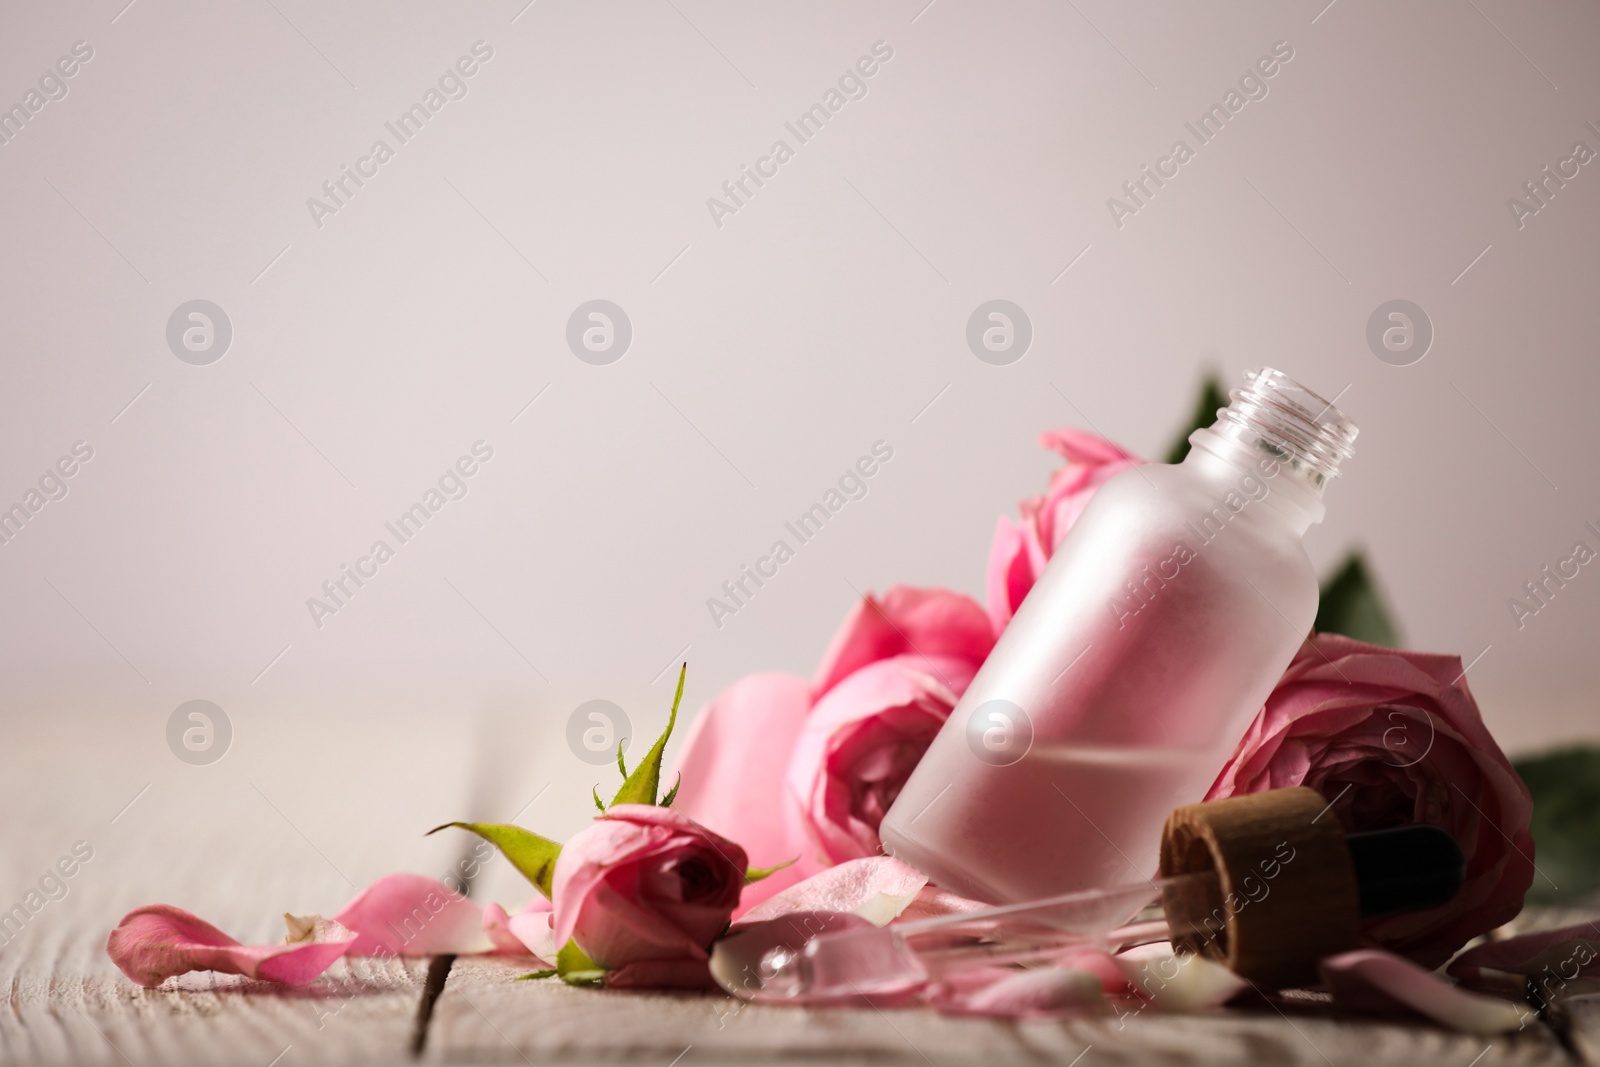 Photo of Bottle of essential oil and roses on white wooden table against light background. Space for text